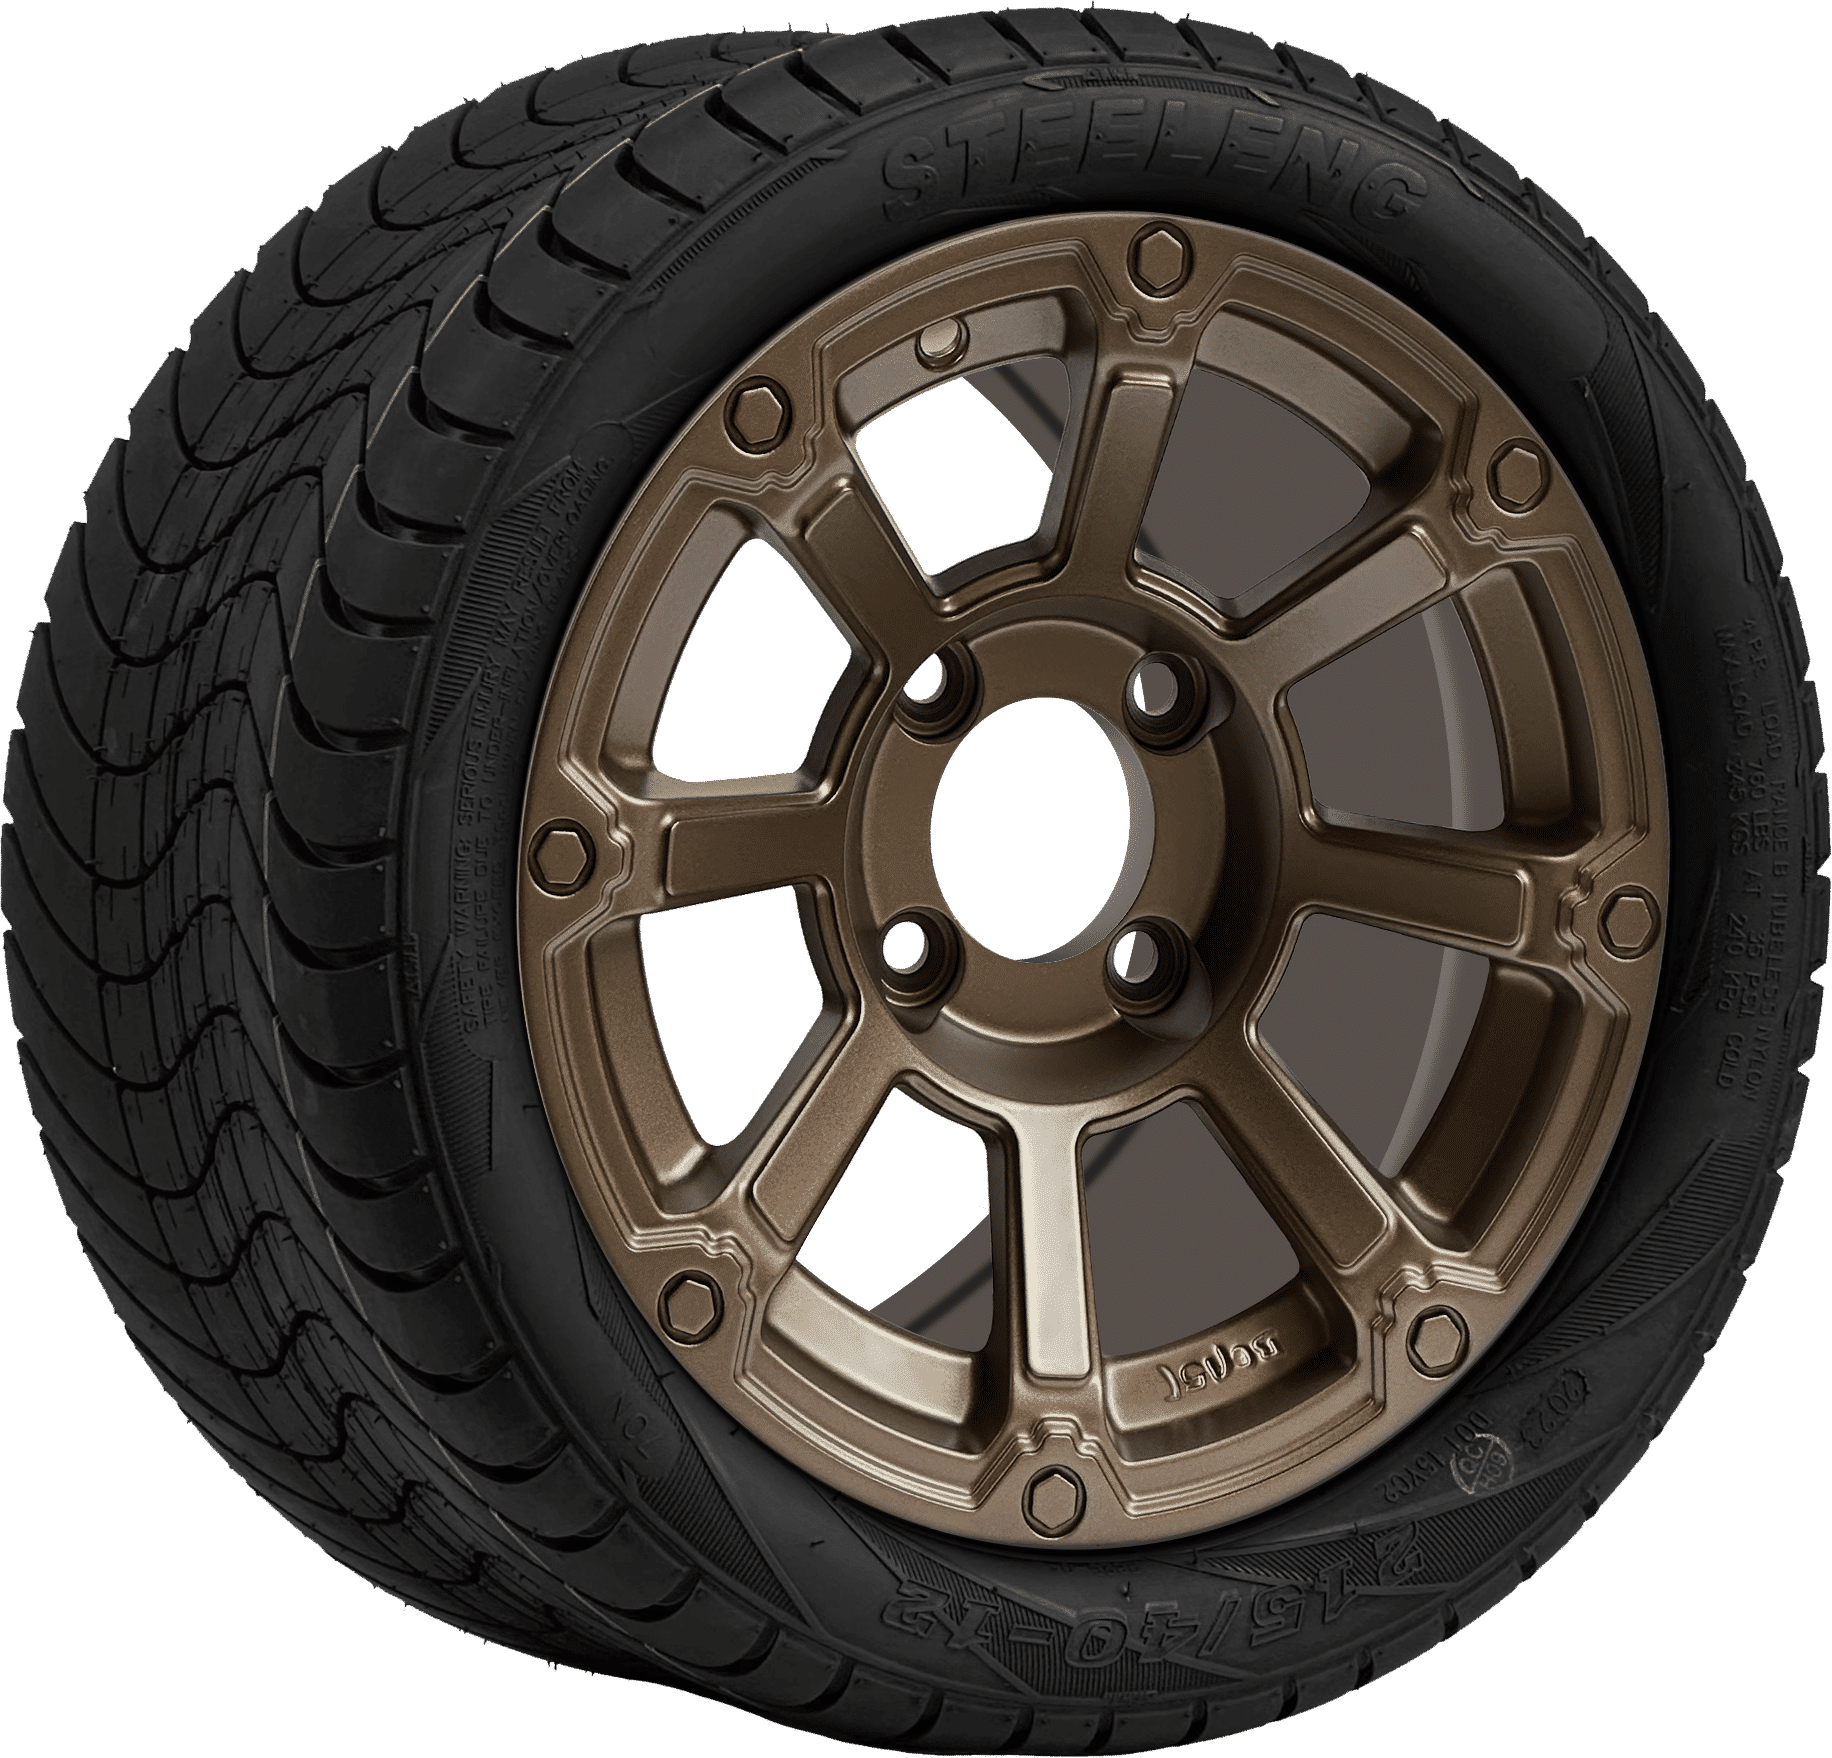 BNDL-TR1211-WH1263-CC0026-LN0002 12″ CYCLOPS BRONZE WHEEL – ALUMINUM ALLOY / STEELENG 215/40-12 LOW PROFILE TIRE DOT APPROVED